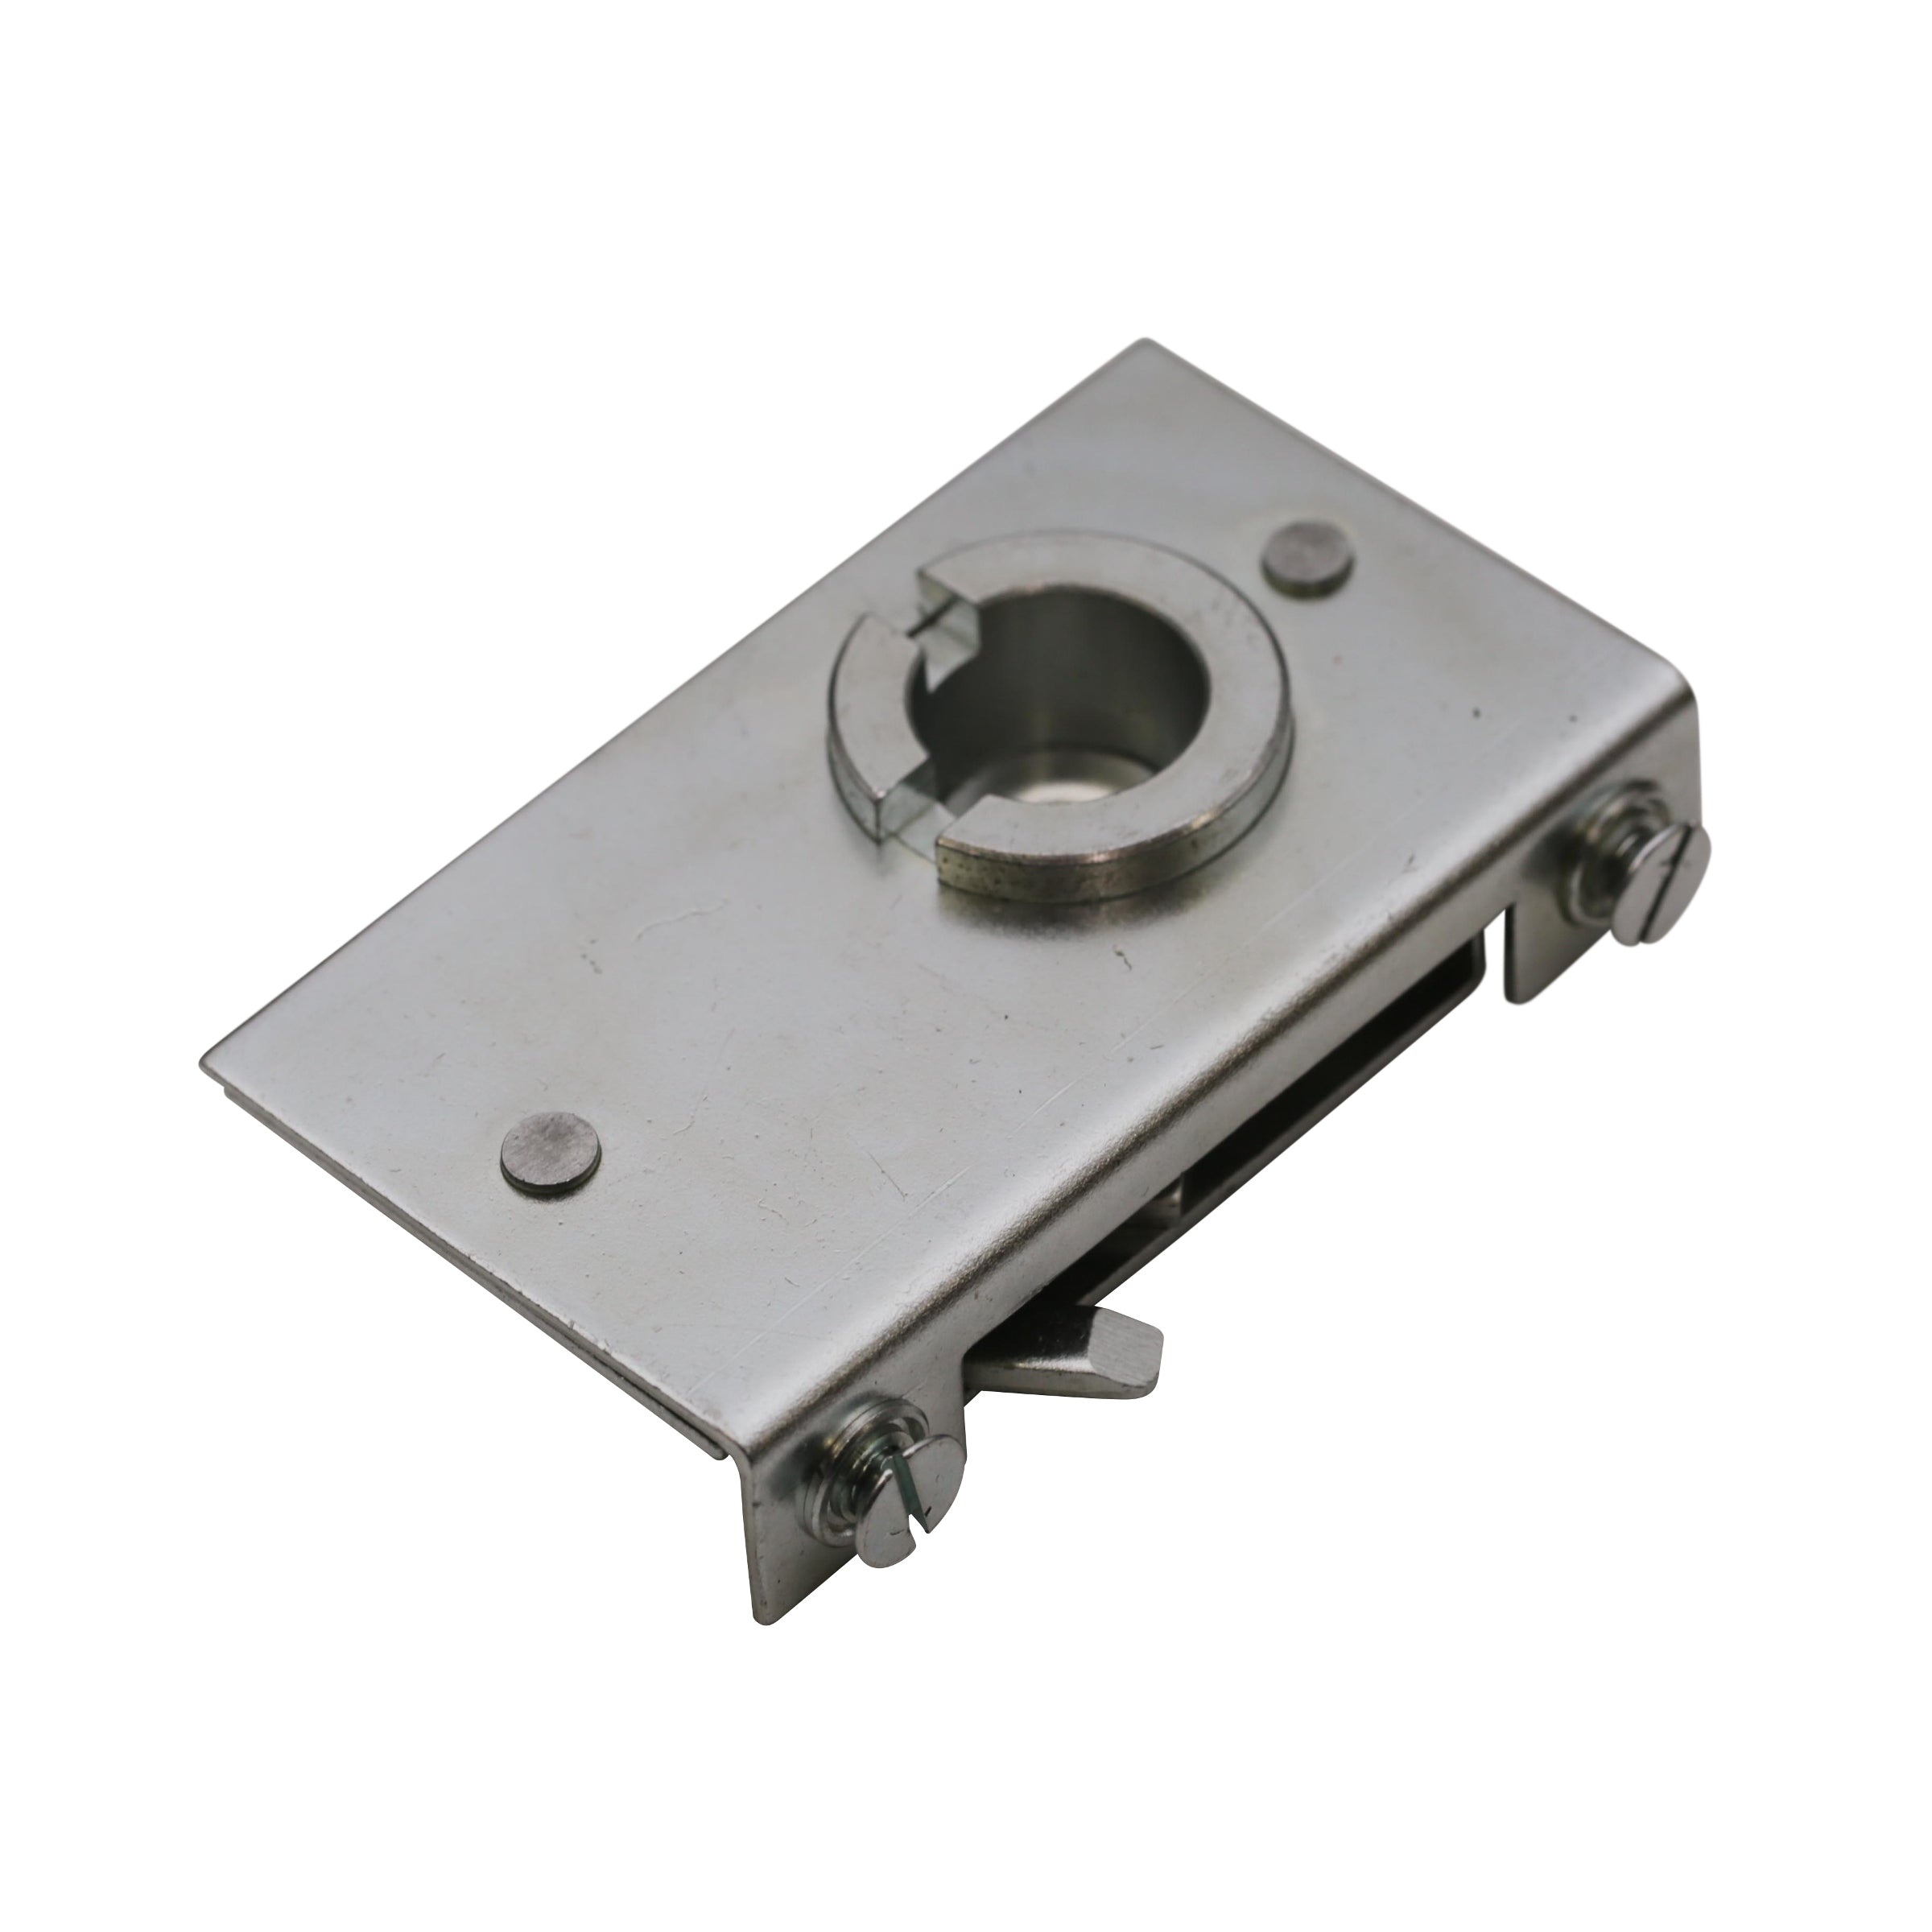 Lid Latches